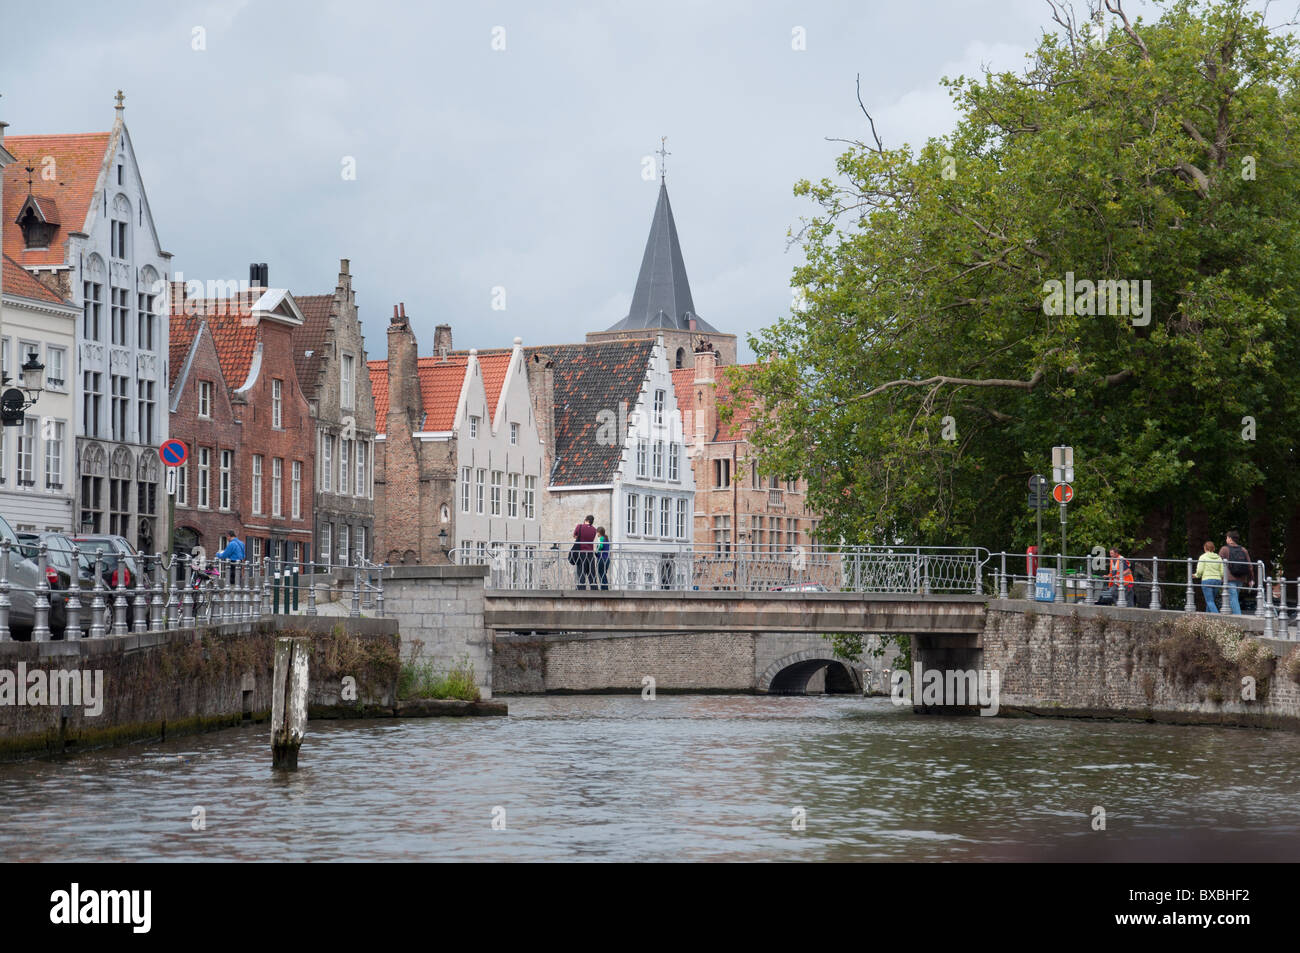 Some of the buildings in Bruges, Belgium as seen from a canal cruise boat on a canal. Stock Photo